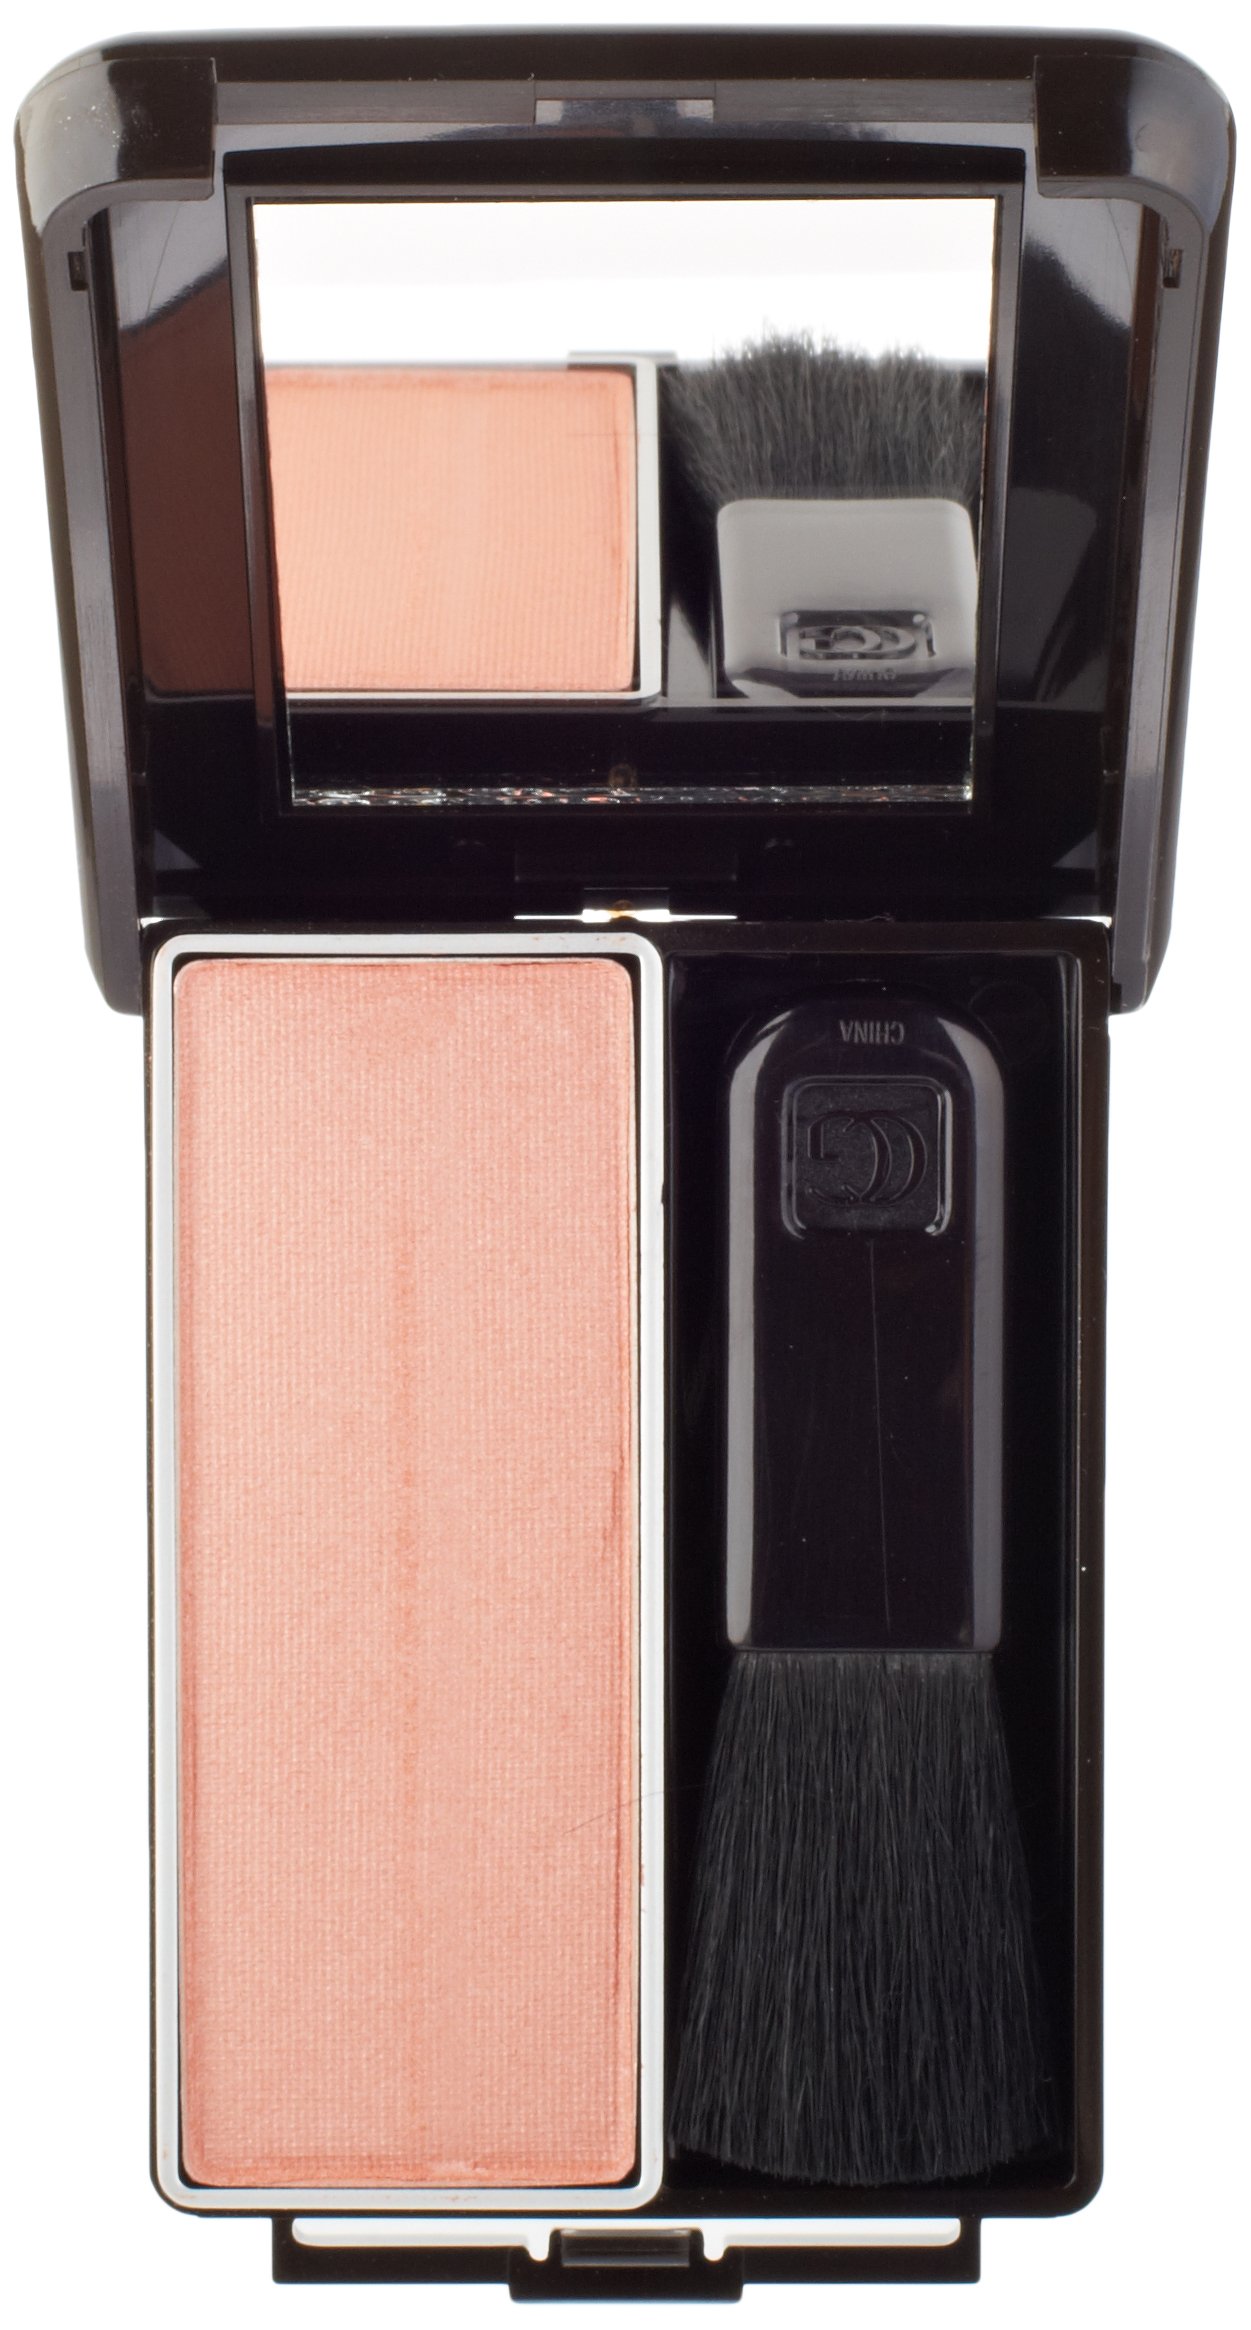 CoverGirl Classic Color Blush Soft Mink(N) 590, 0.27-Ounce Pan (Pack of 2)